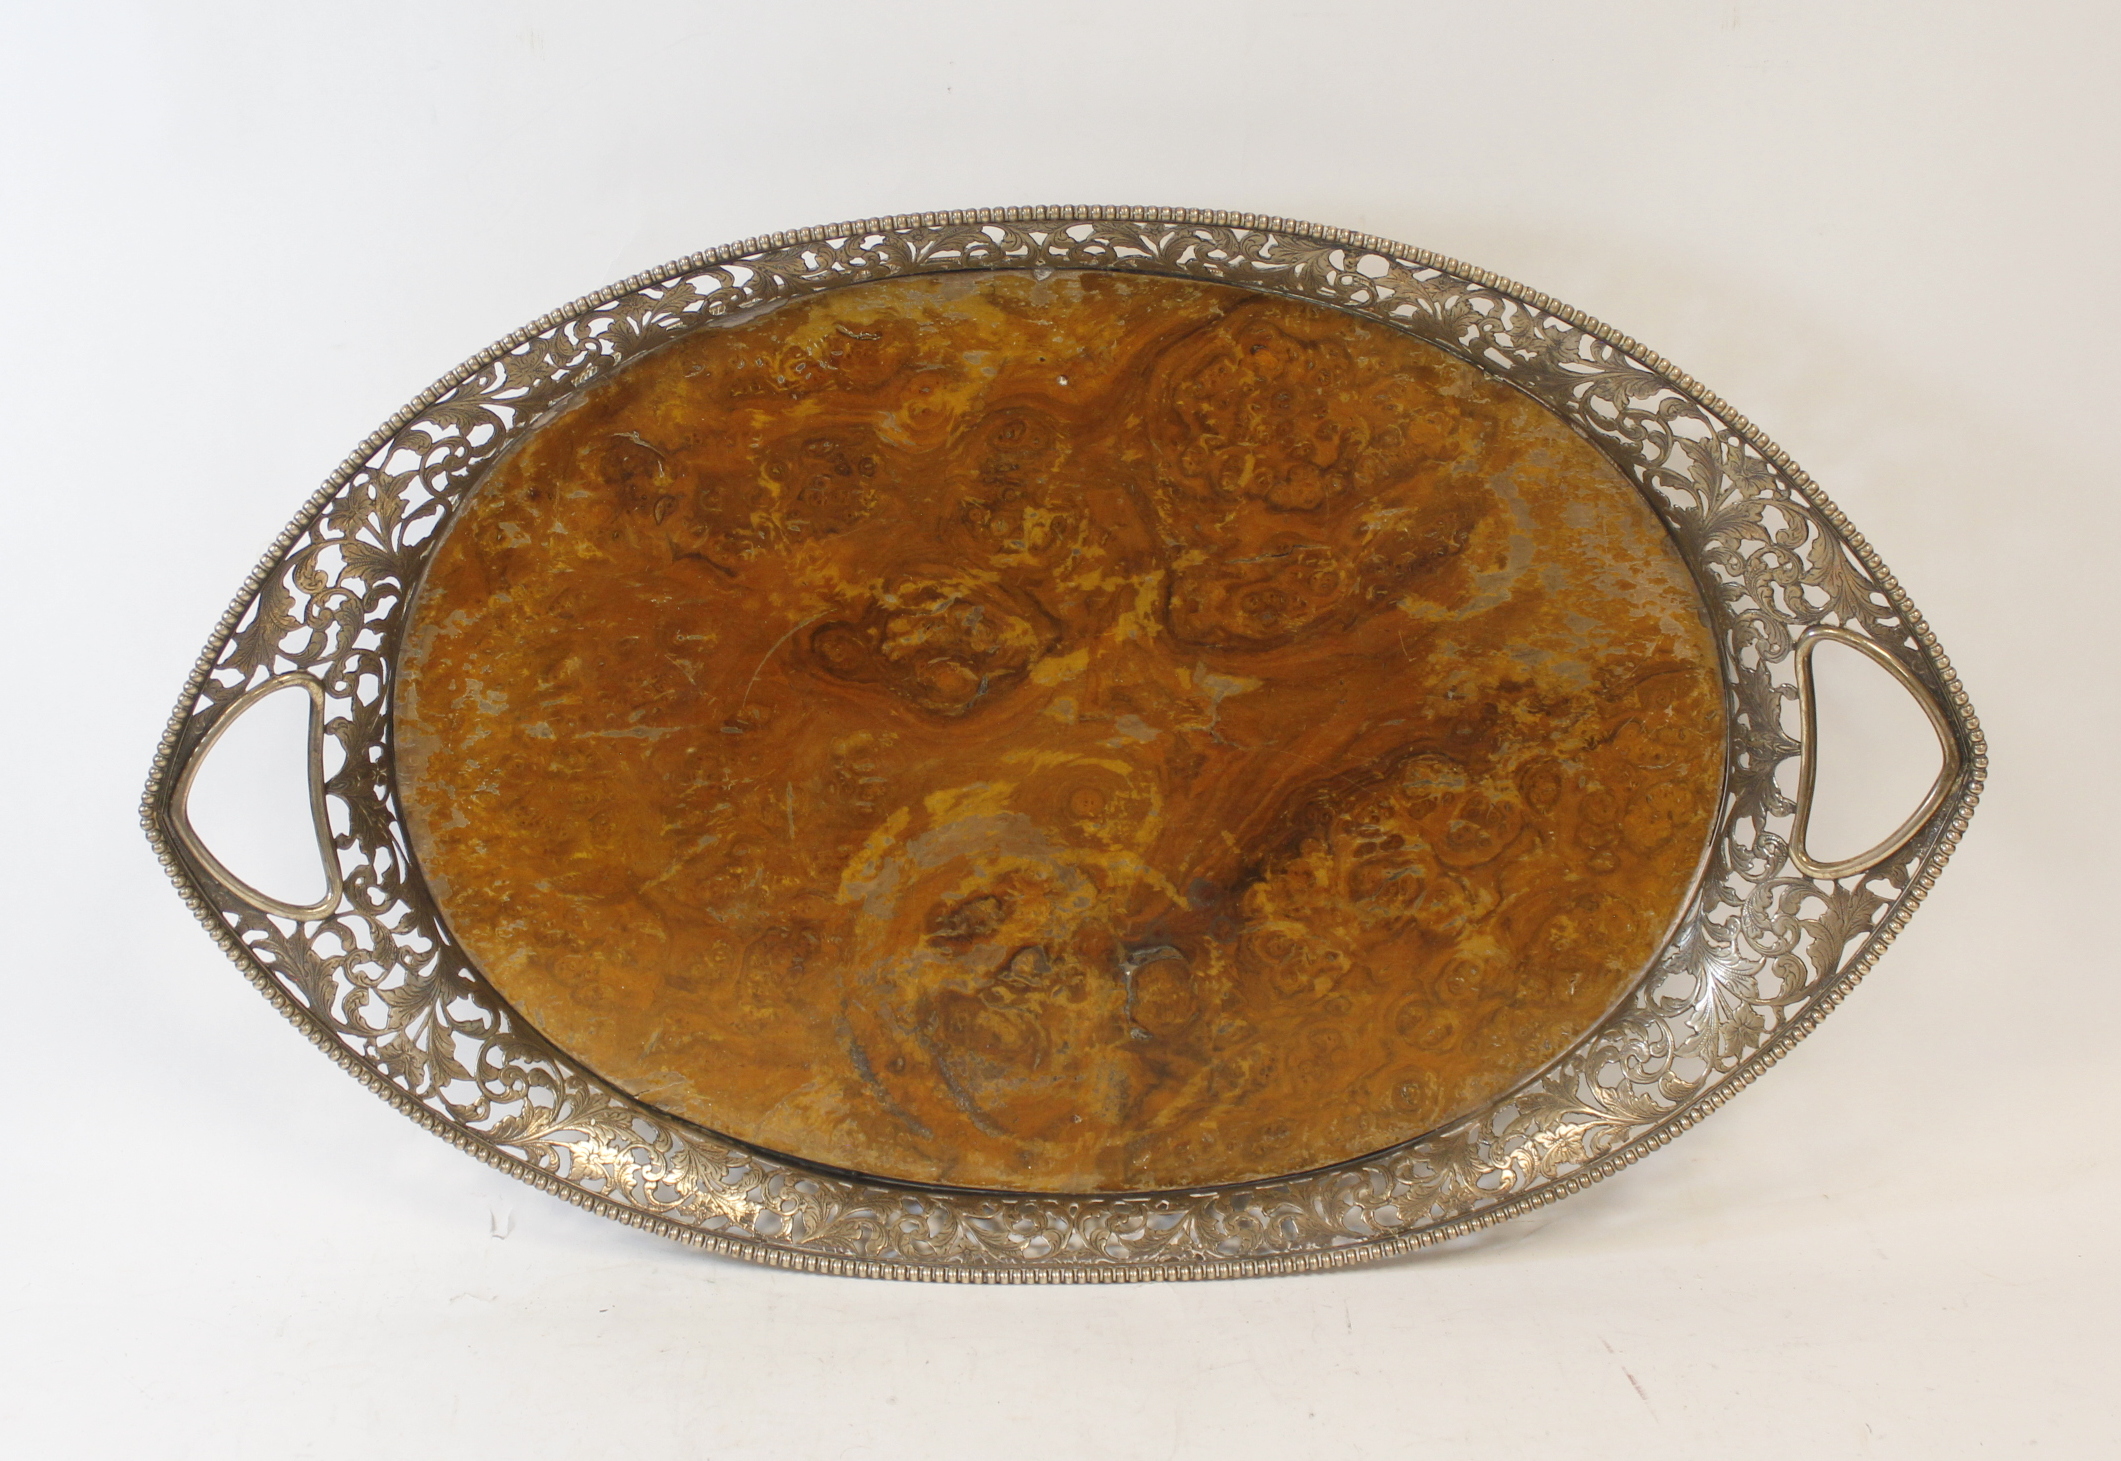 Dutch burr walnut oval tray with pierced and engraved silver gallery, Import Marks, 1908, 50cm.